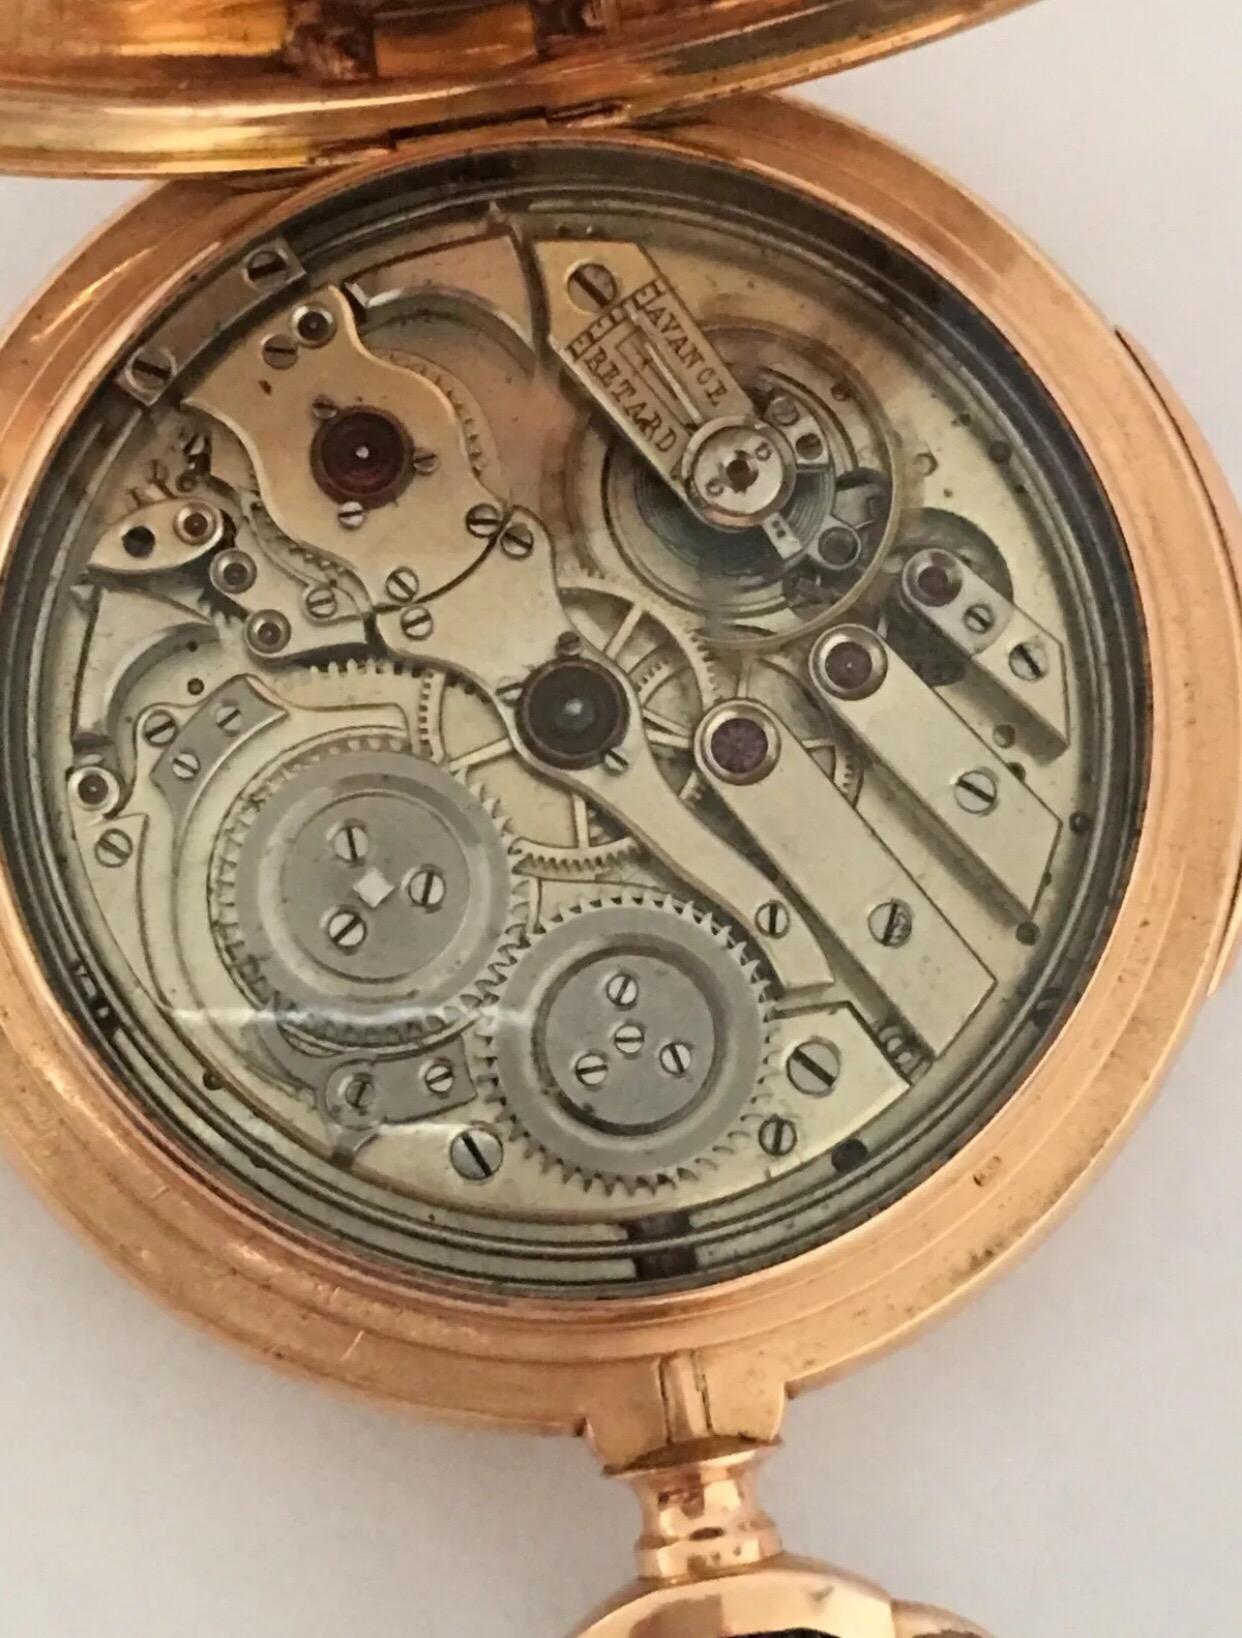 14k Gold Full Hunter LeCoultre & Co. Minute Repeater Antique Pocket Watch For Sale 4